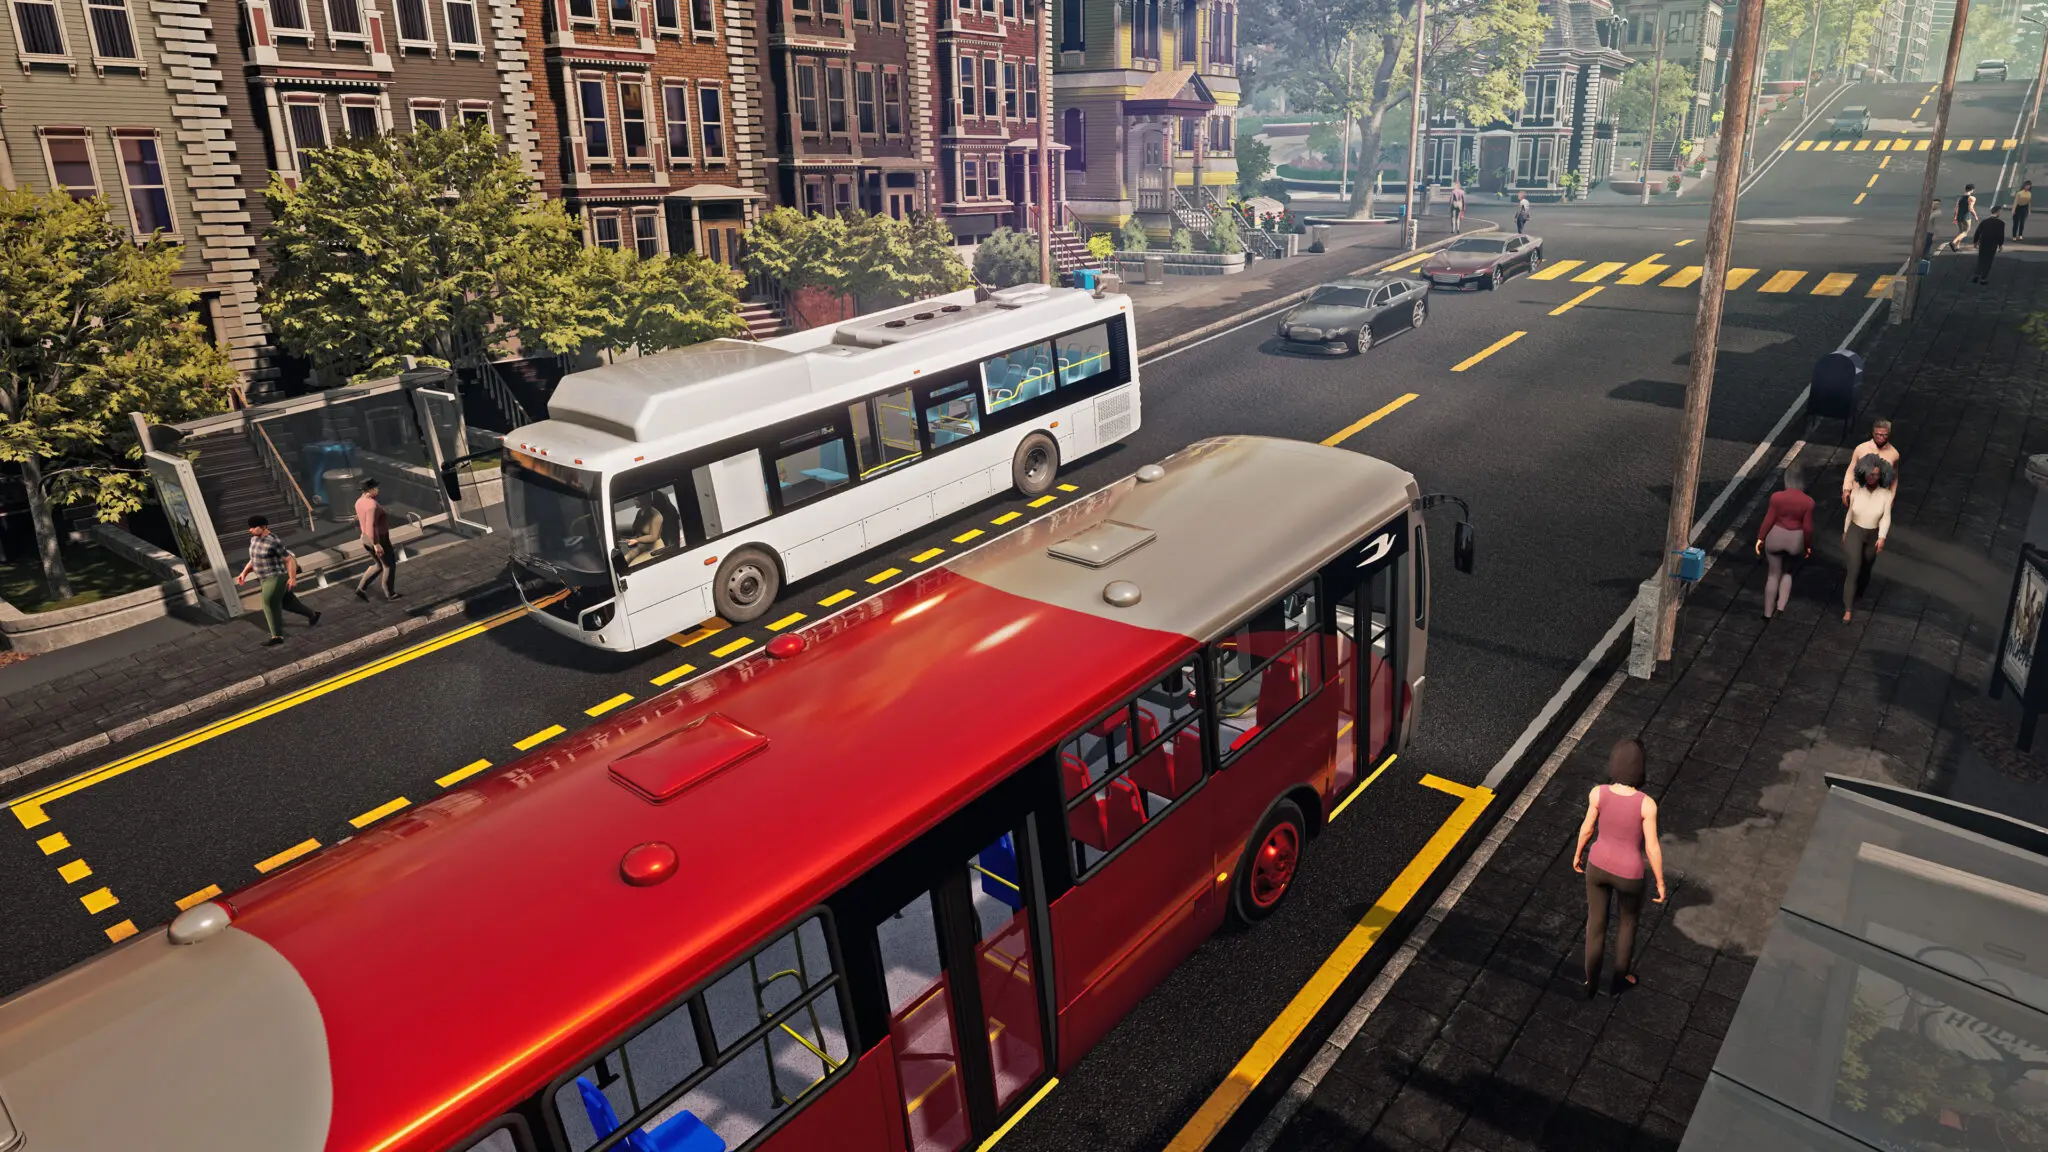 bus simulator 21 free download for pc